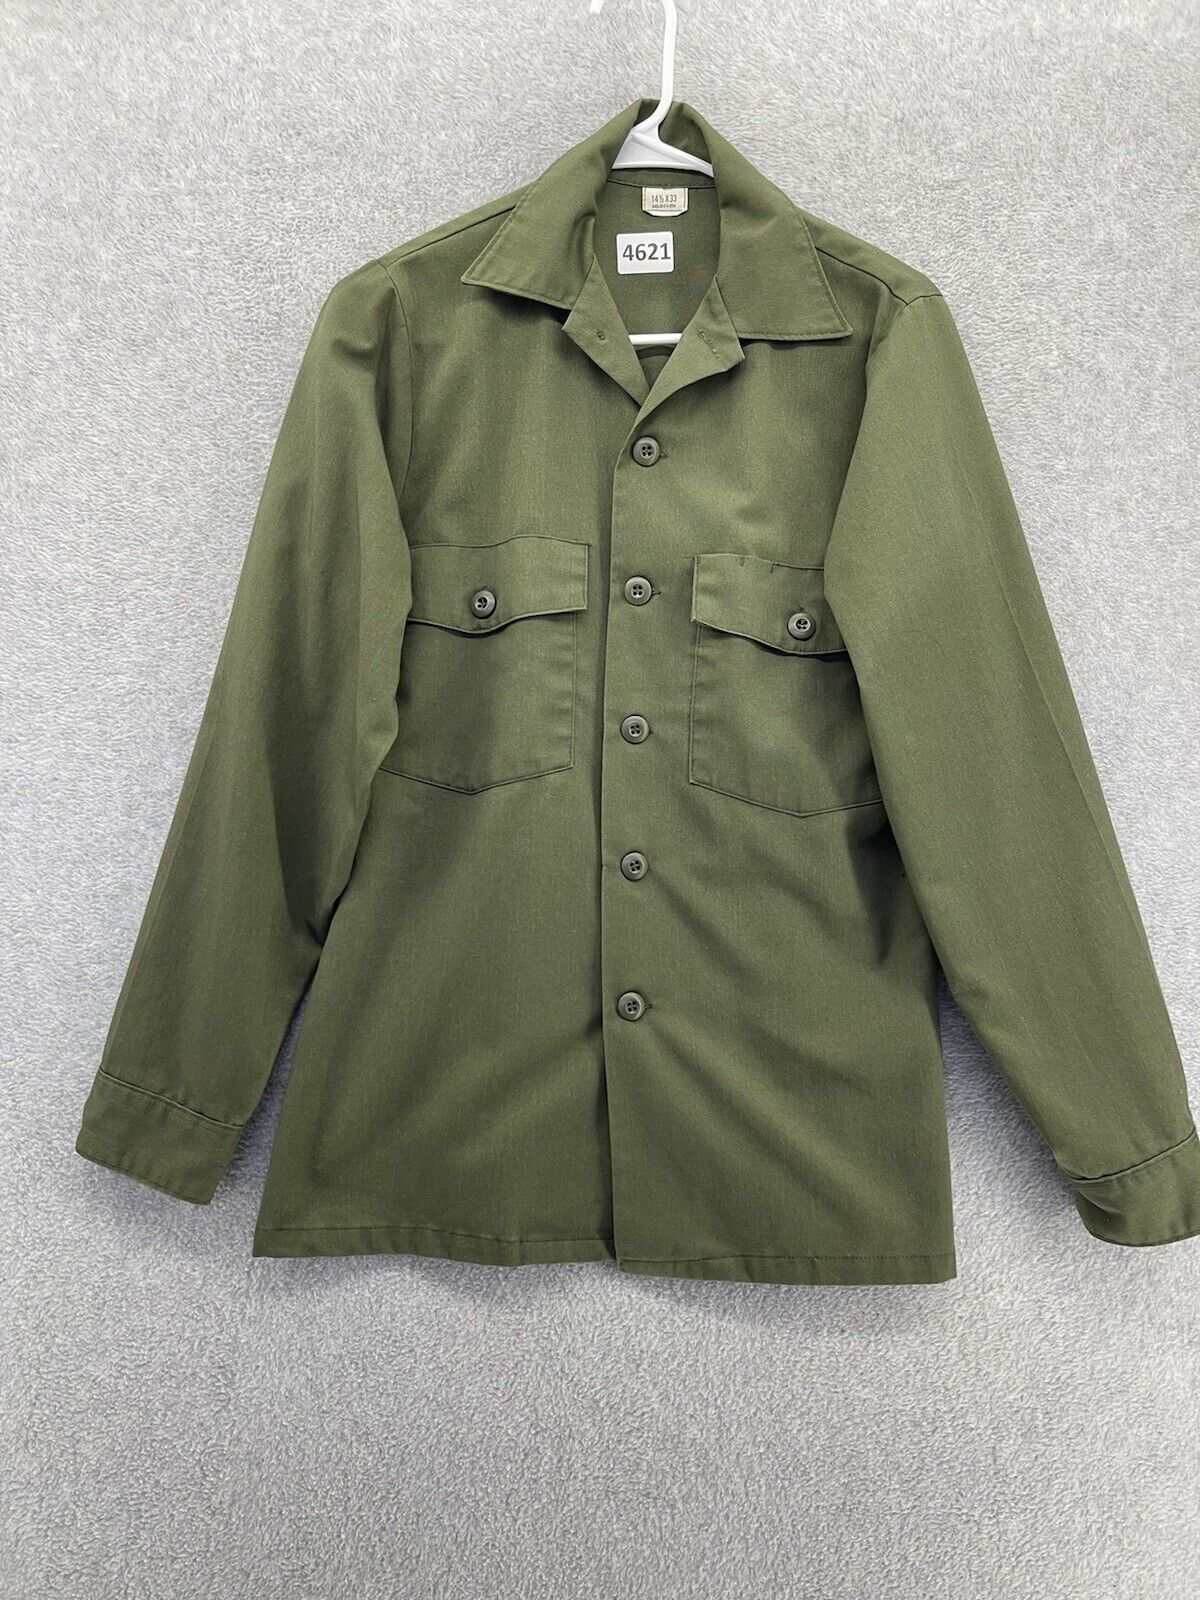 US Military Utility Top Button Front Solid Olive Green Vintage Size 14.5x33